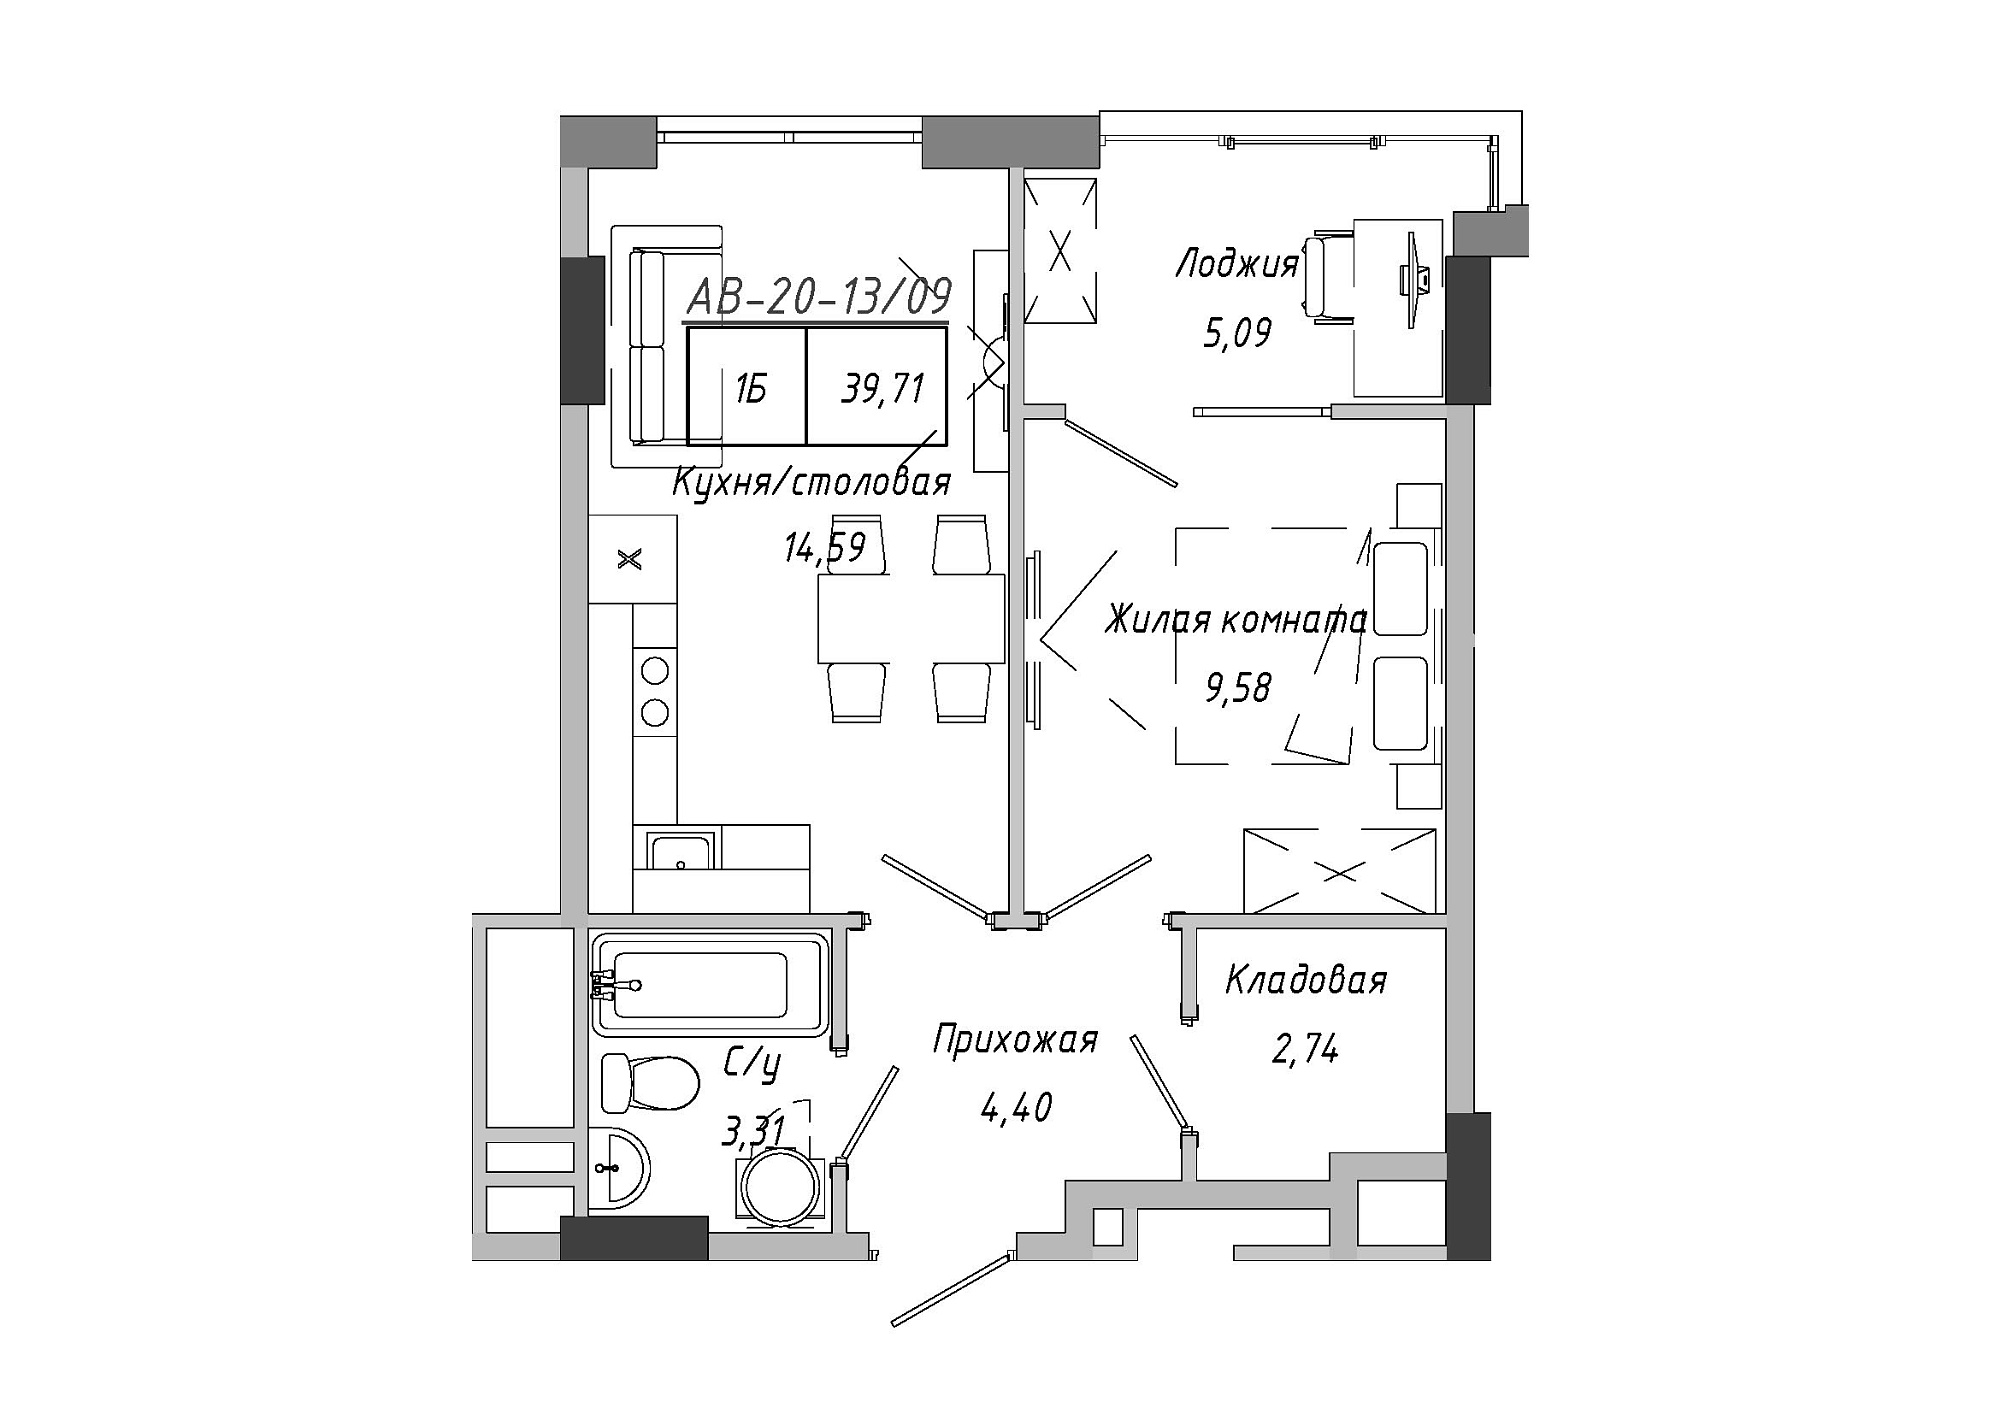 Planning 1-rm flats area 39.71m2, AB-20-13/00109.